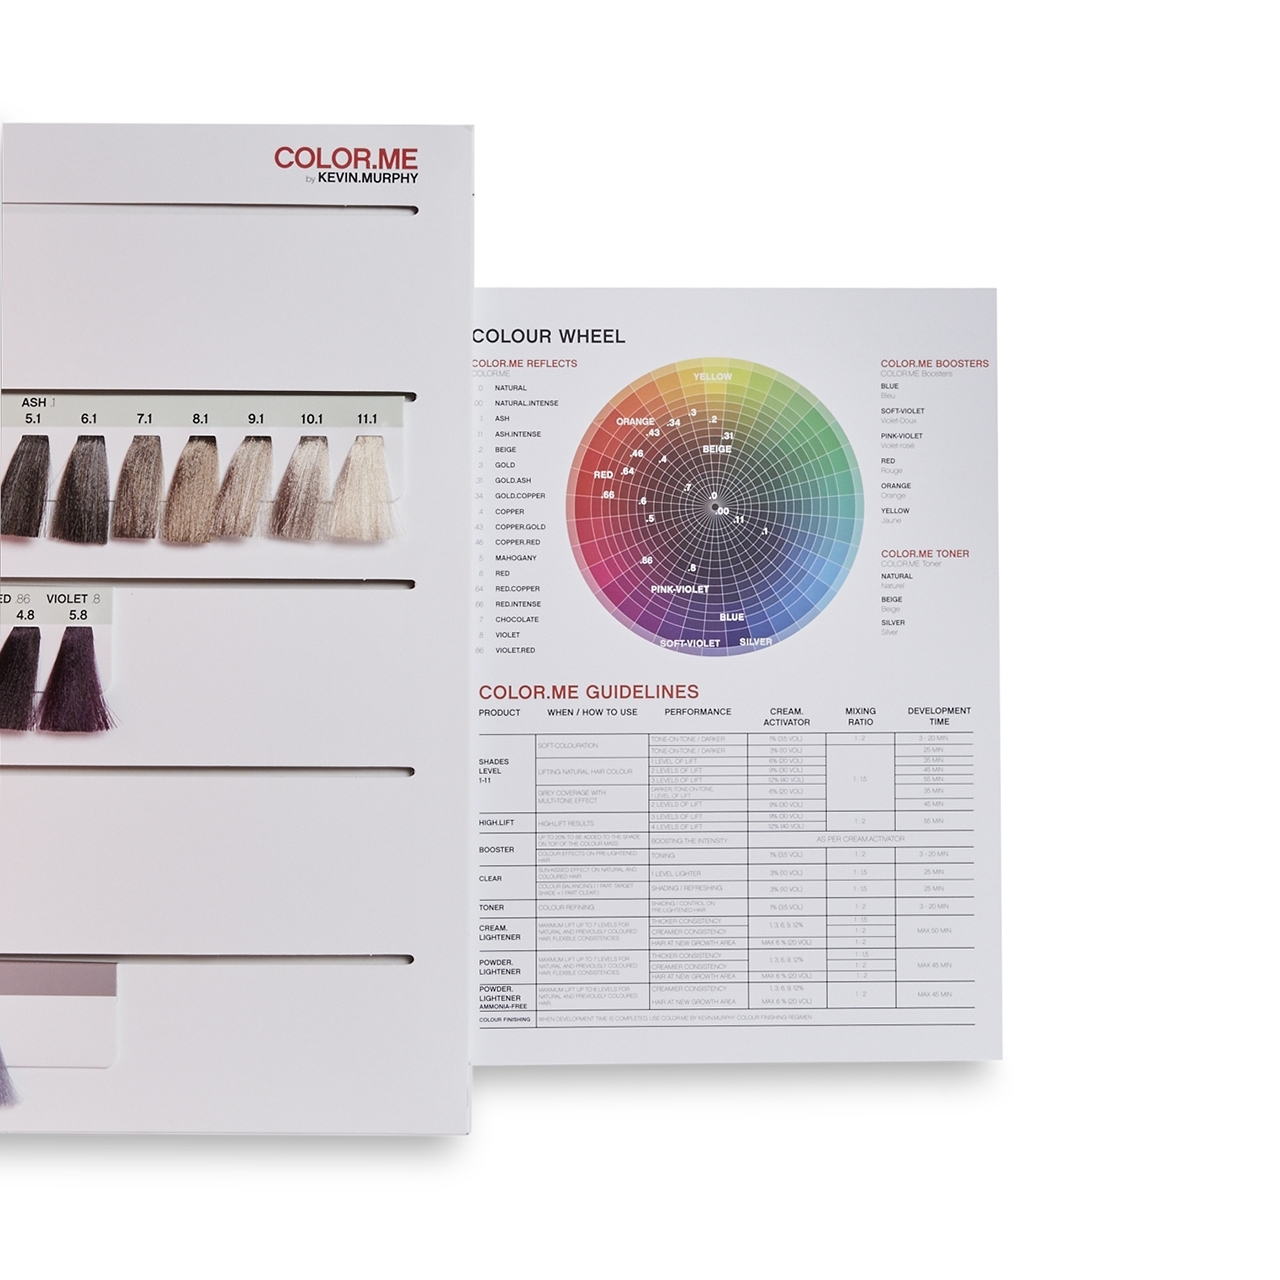 swatch book